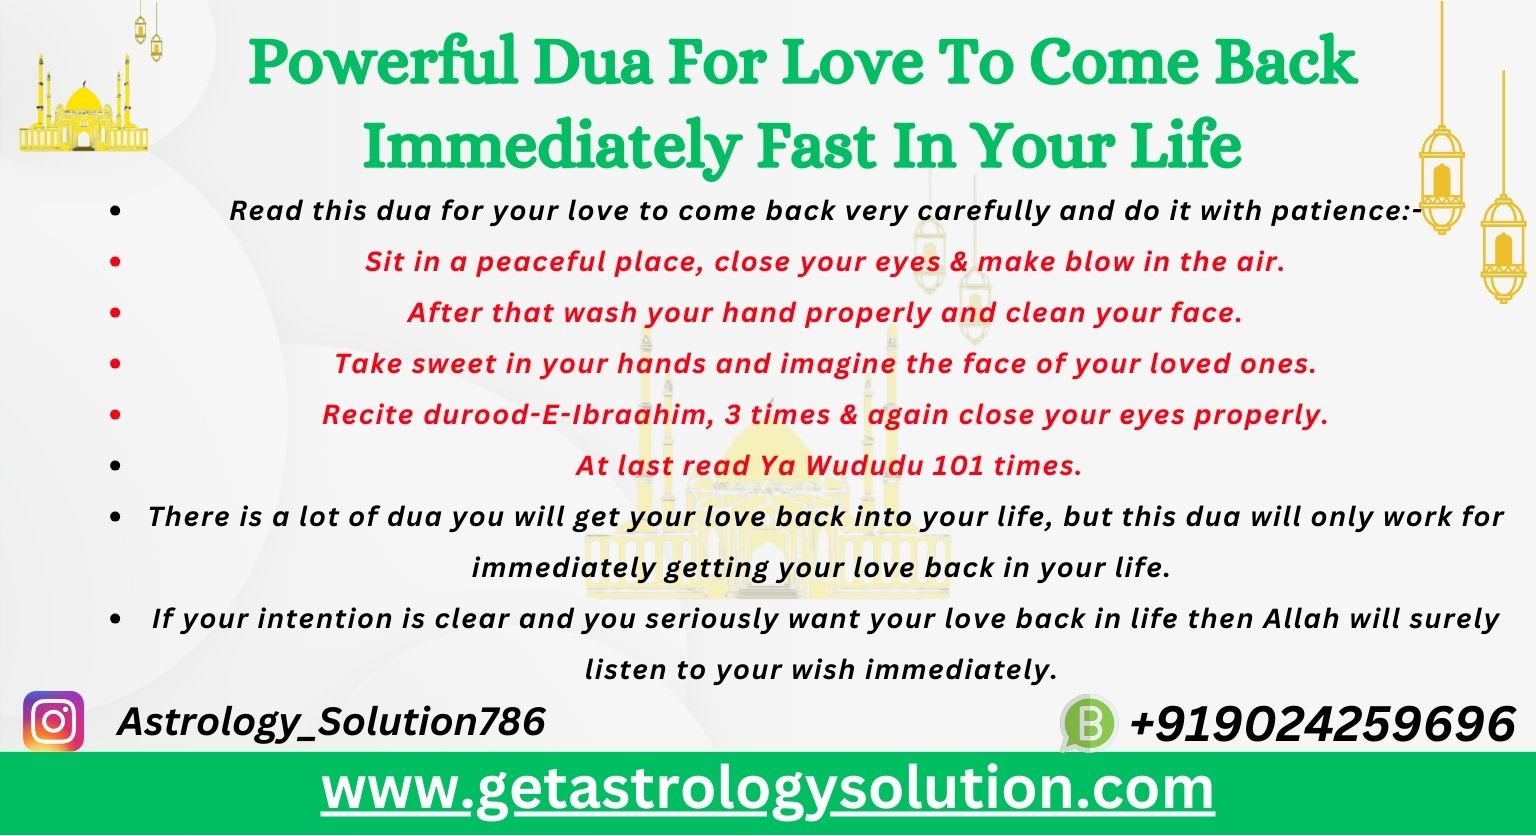 Powerful Dua For Love To Come Back Immediately Fast In Your Life